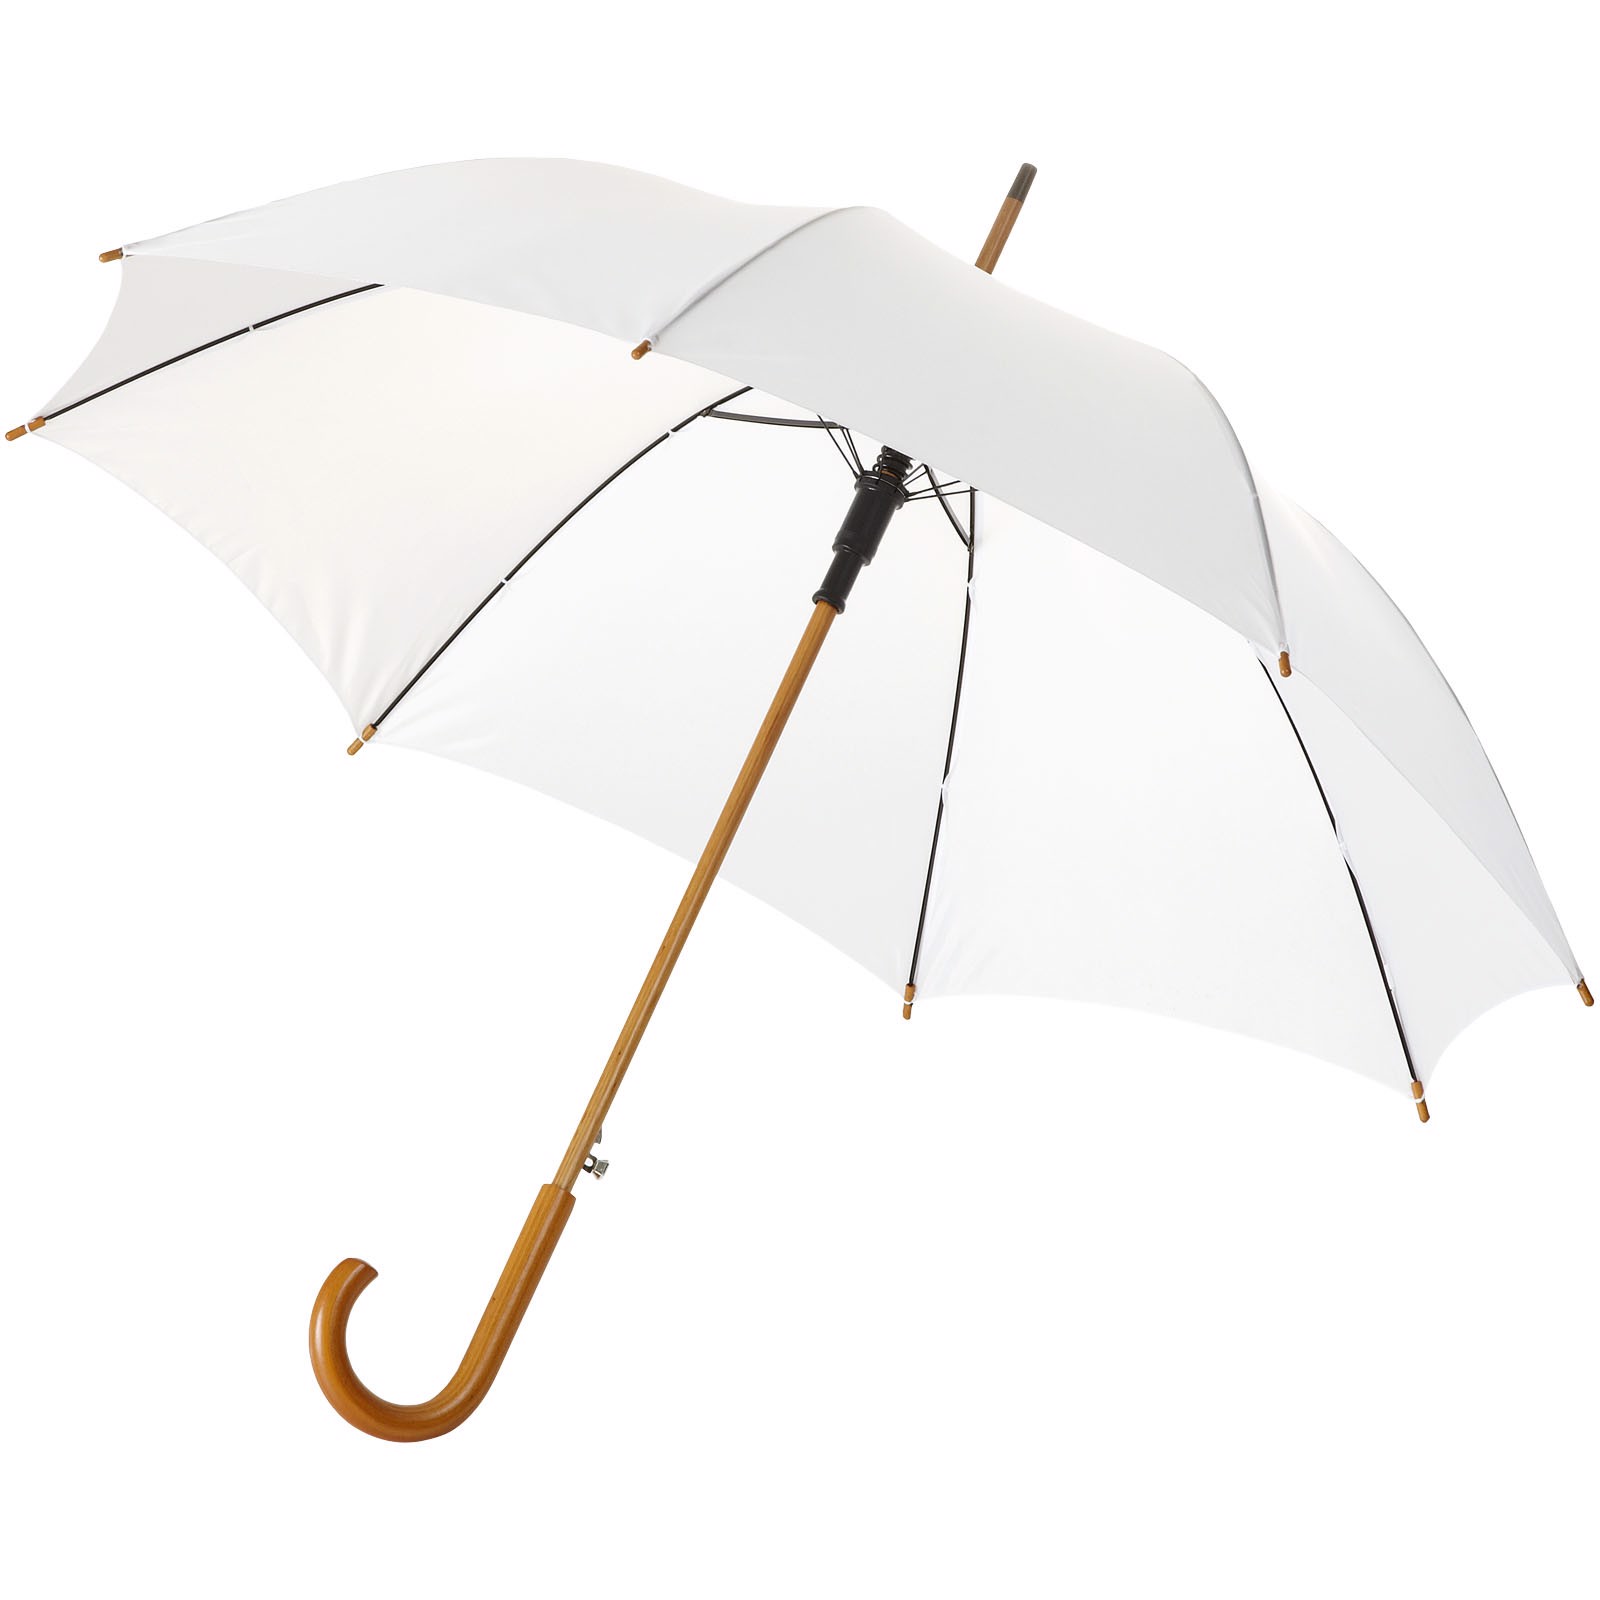 Kyle 23" auto open umbrella wooden shaft and handle - White